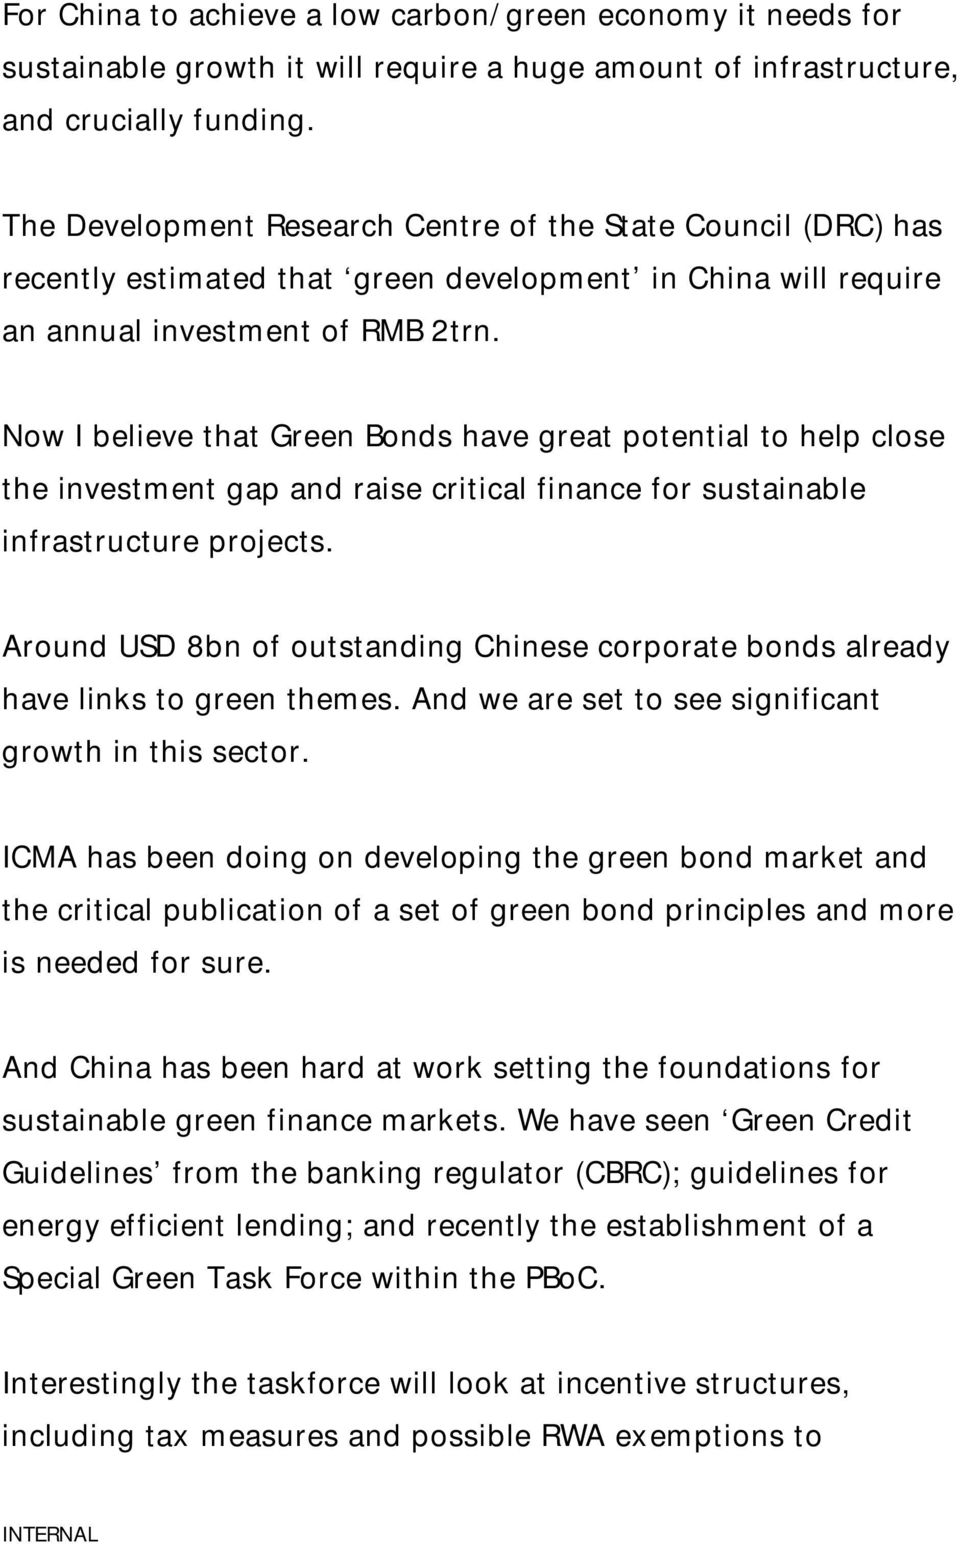 Now I believe that Green Bonds have great potential to help close the investment gap and raise critical finance for sustainable infrastructure projects.